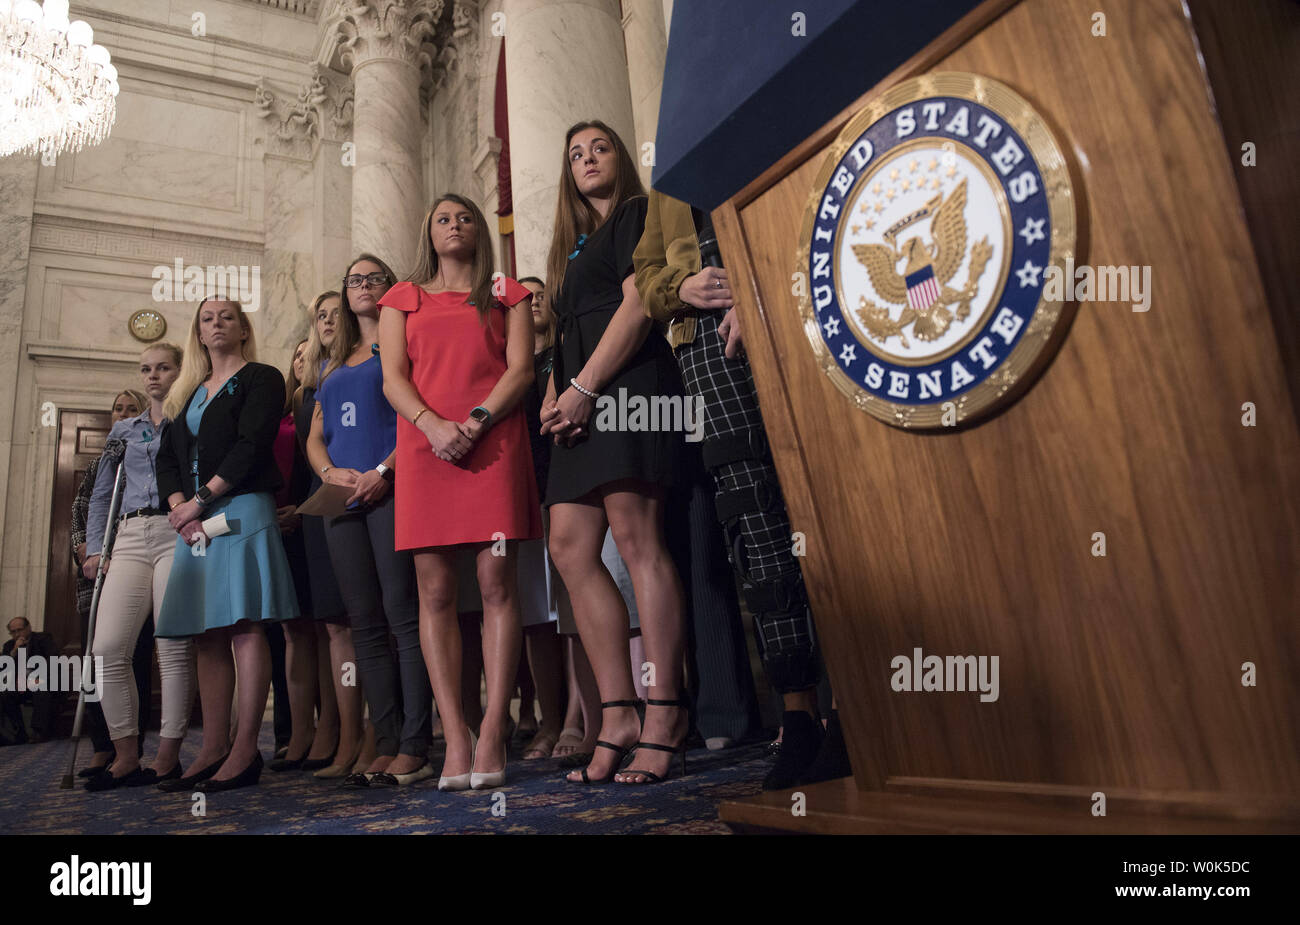 Victims of convicted child molester and former Team USA Olympic doctor Larry Nassar attend a press conference on abuse within gymnastics and youth sports and the necessary reforms needed to keep young athletes safe, on Capitol Hill in Washington, D.C. on July 24, 2018.   Photo by Kevin Dietsch/UPI Stock Photo